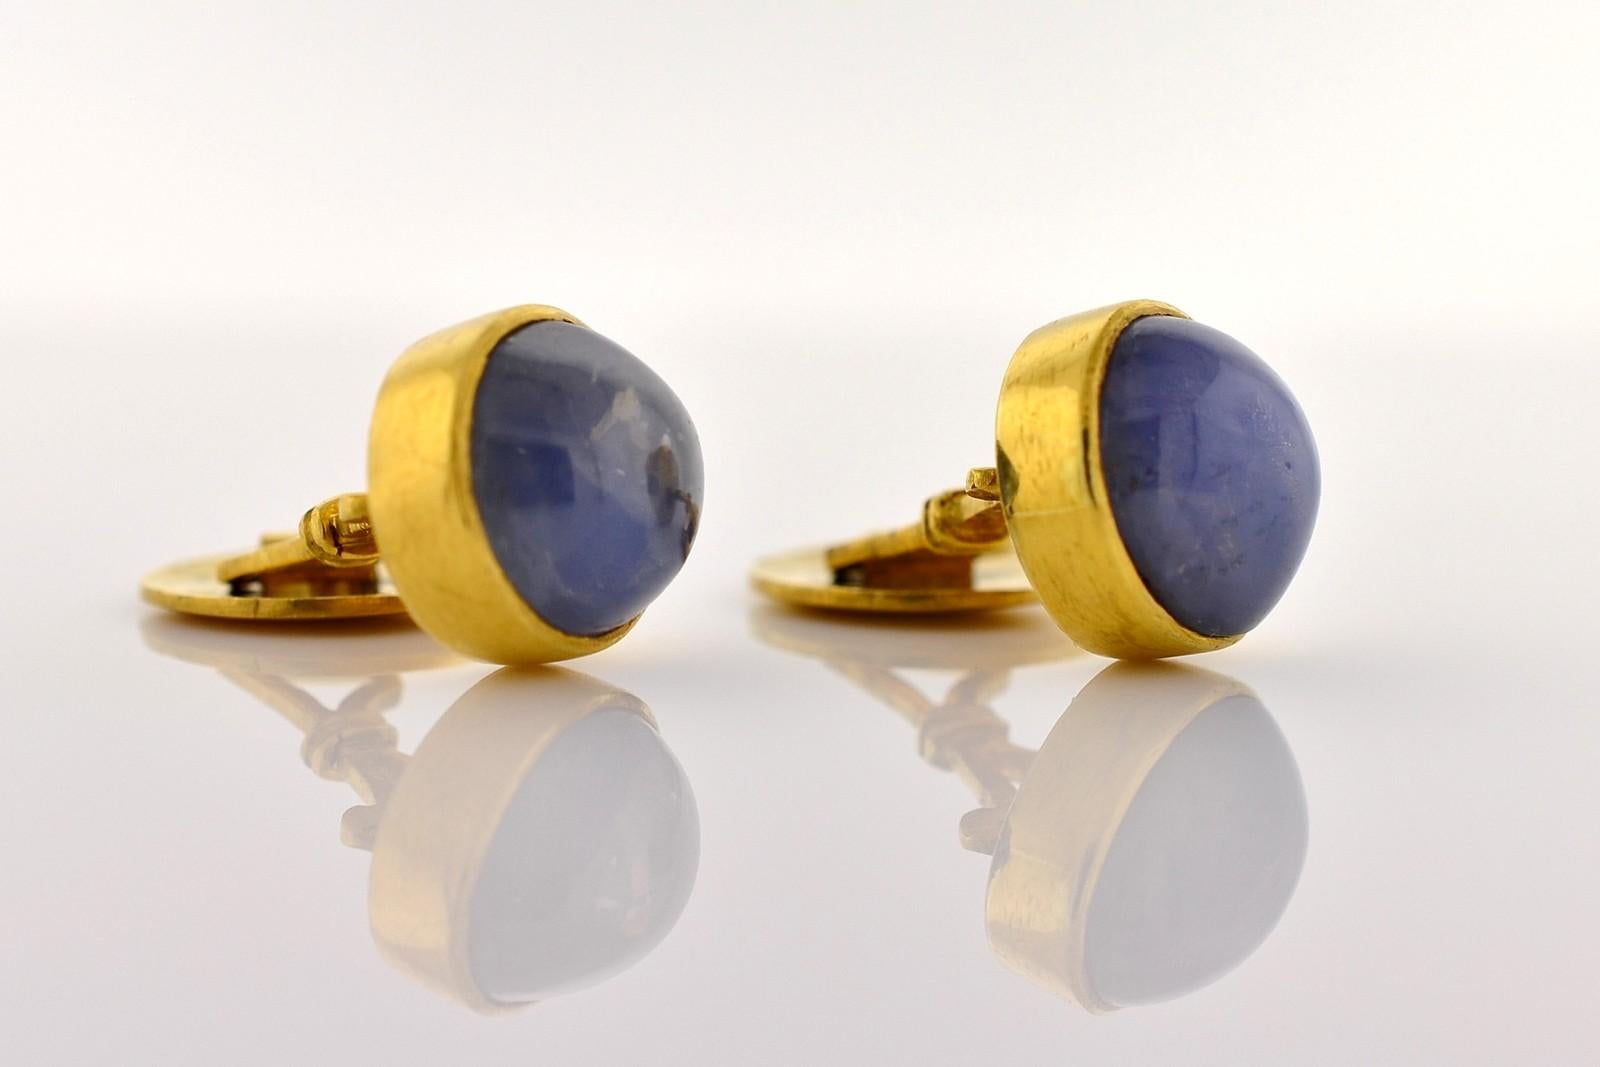 These one-of-a-kind cuff links feature two cabochon Ceylon Star Sapphires.   The Sapphires are bezel set in 18KT yellow gold and both total approx. 20 carat.  One Sapphire measures 13.25 x 11.30 x 7.40 mm and the second measures 12.60 x 11.45 x 7.20